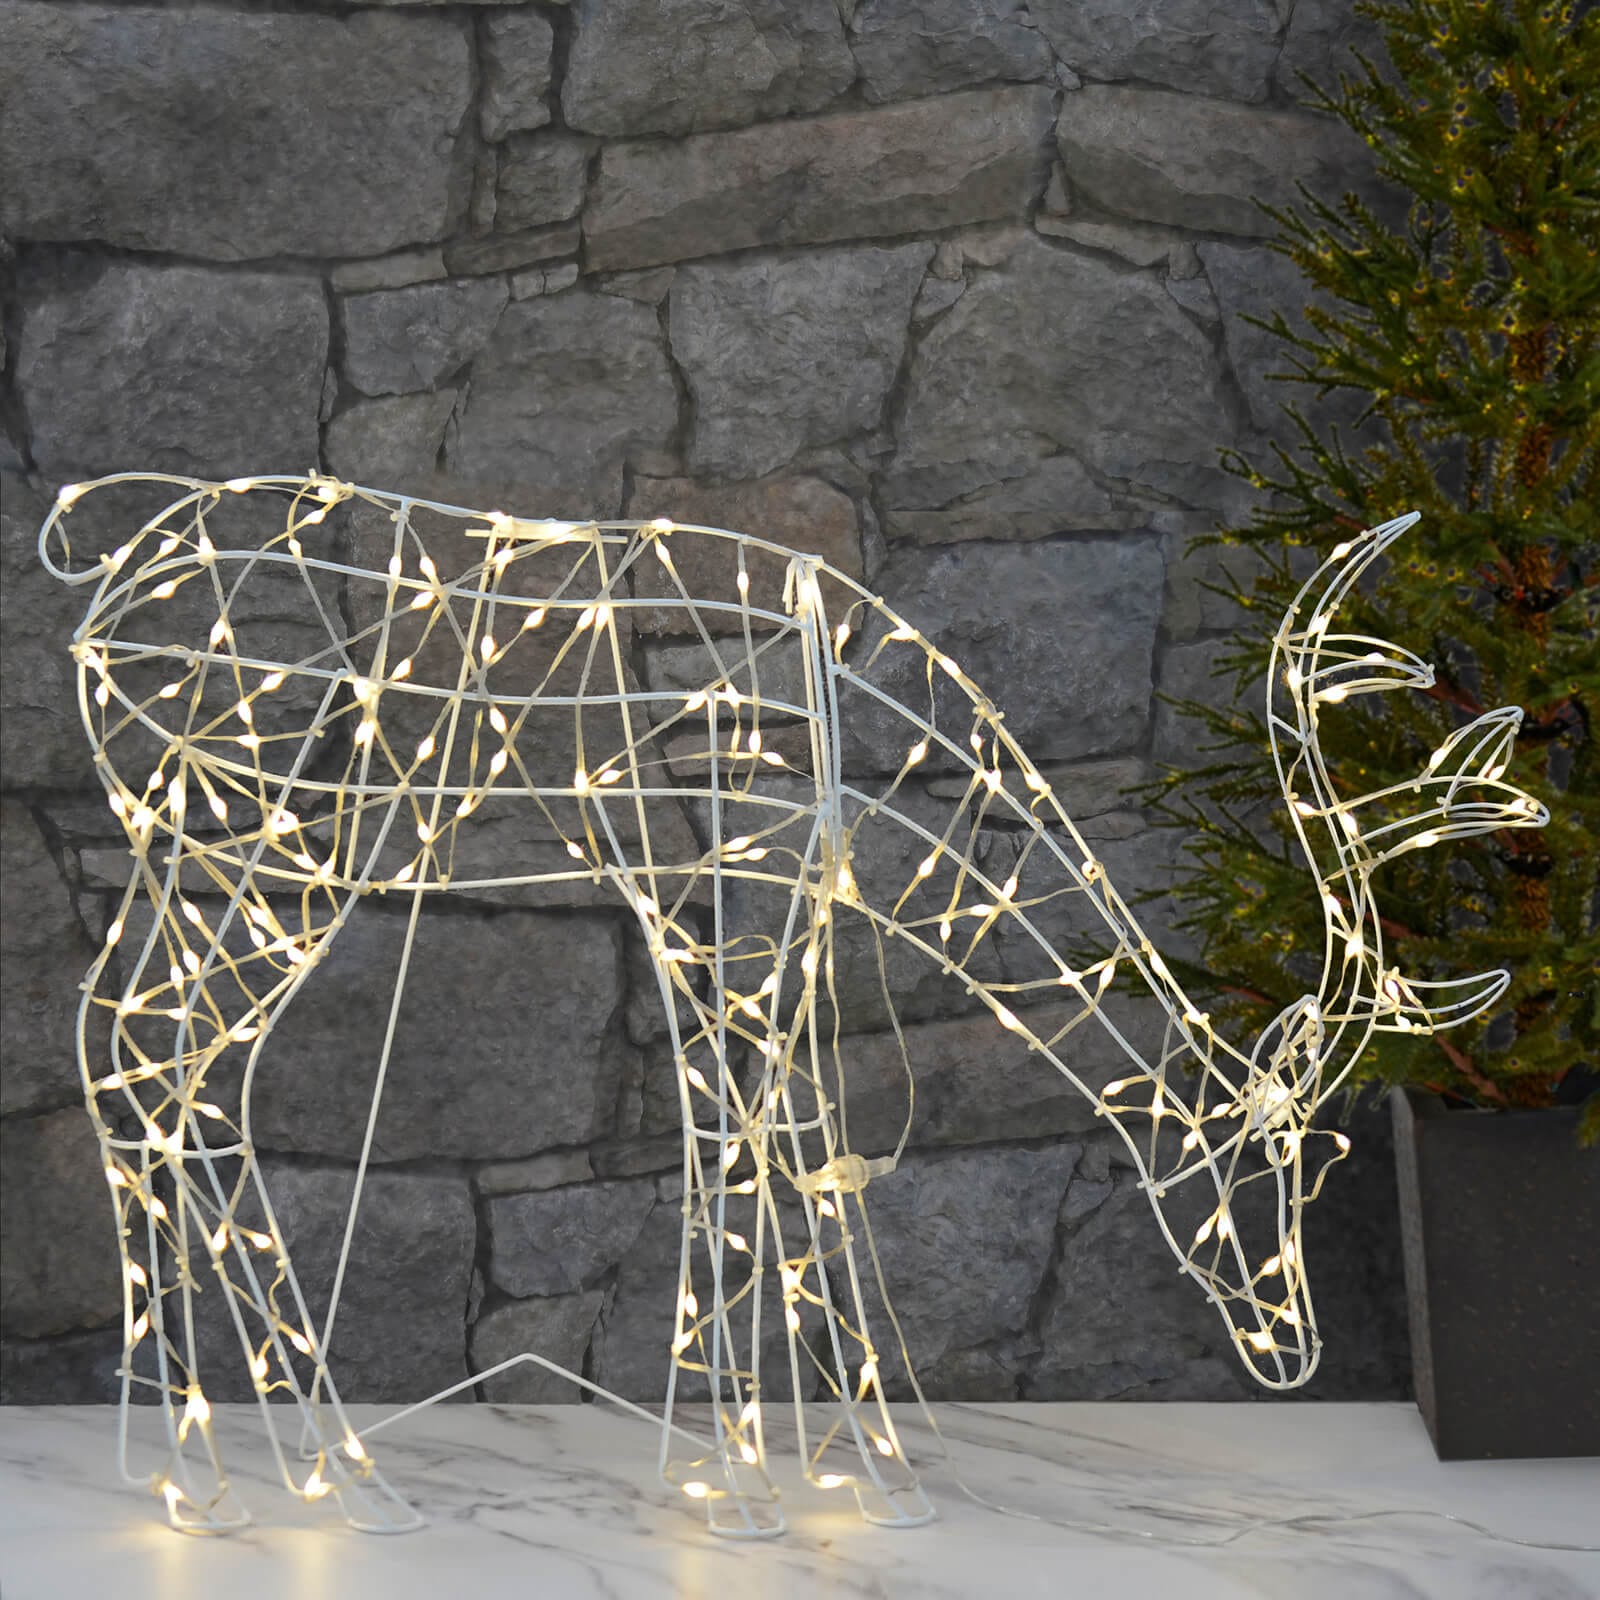 Grazing reindeer outdoor Christmas decoration lit by warm white LED lights on a white wire frame, standing on a patio with stone wall and Christmas tree